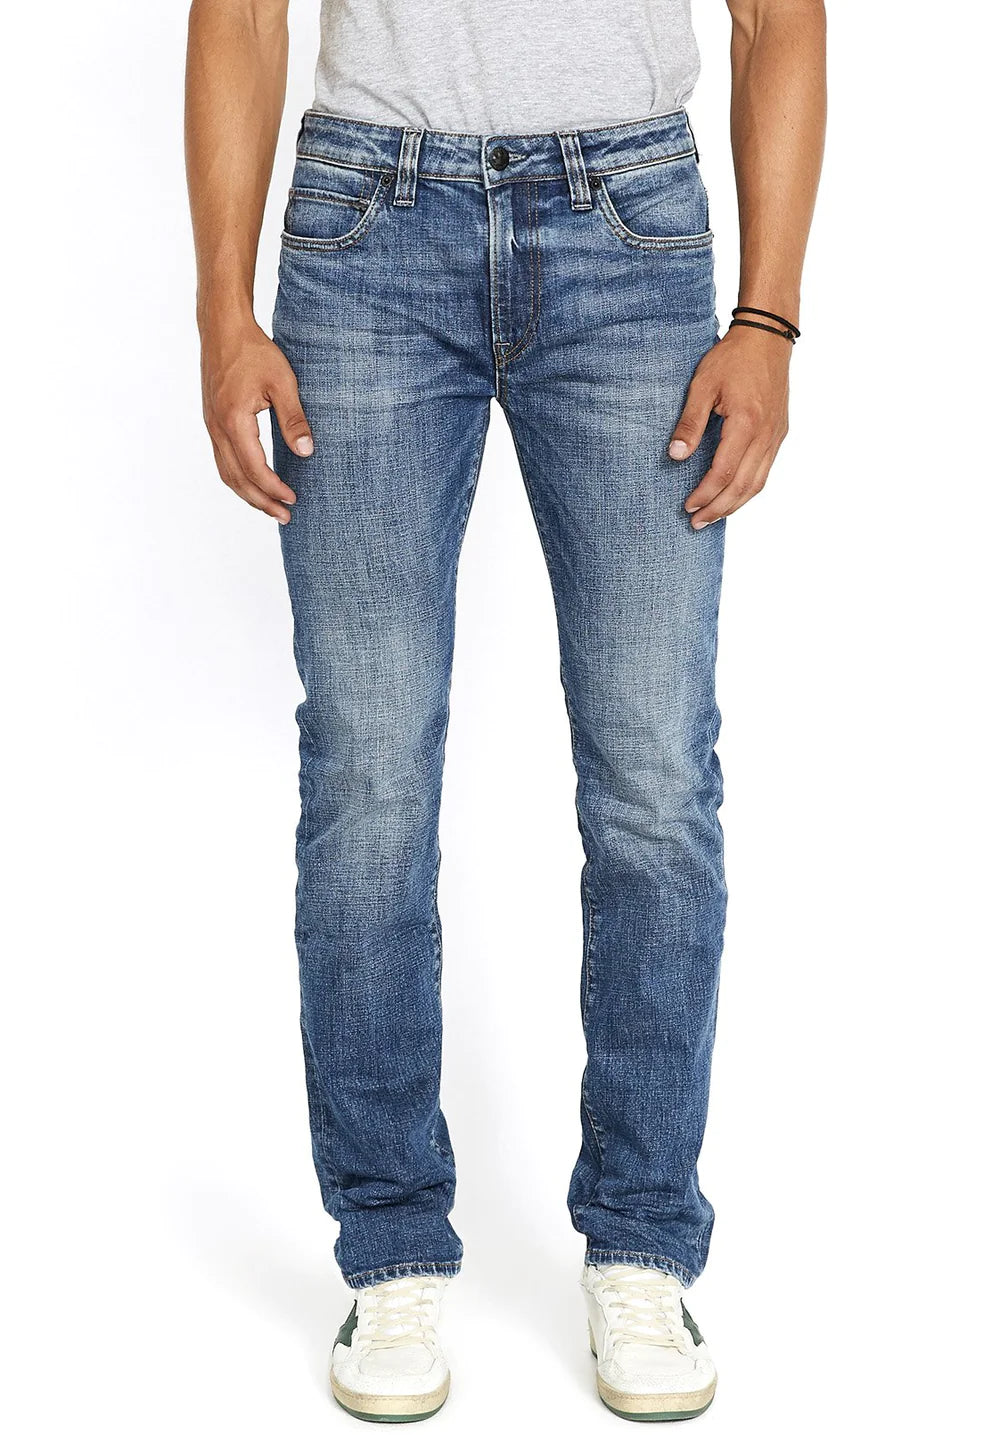 Straight Six Sanded Blue Jeans